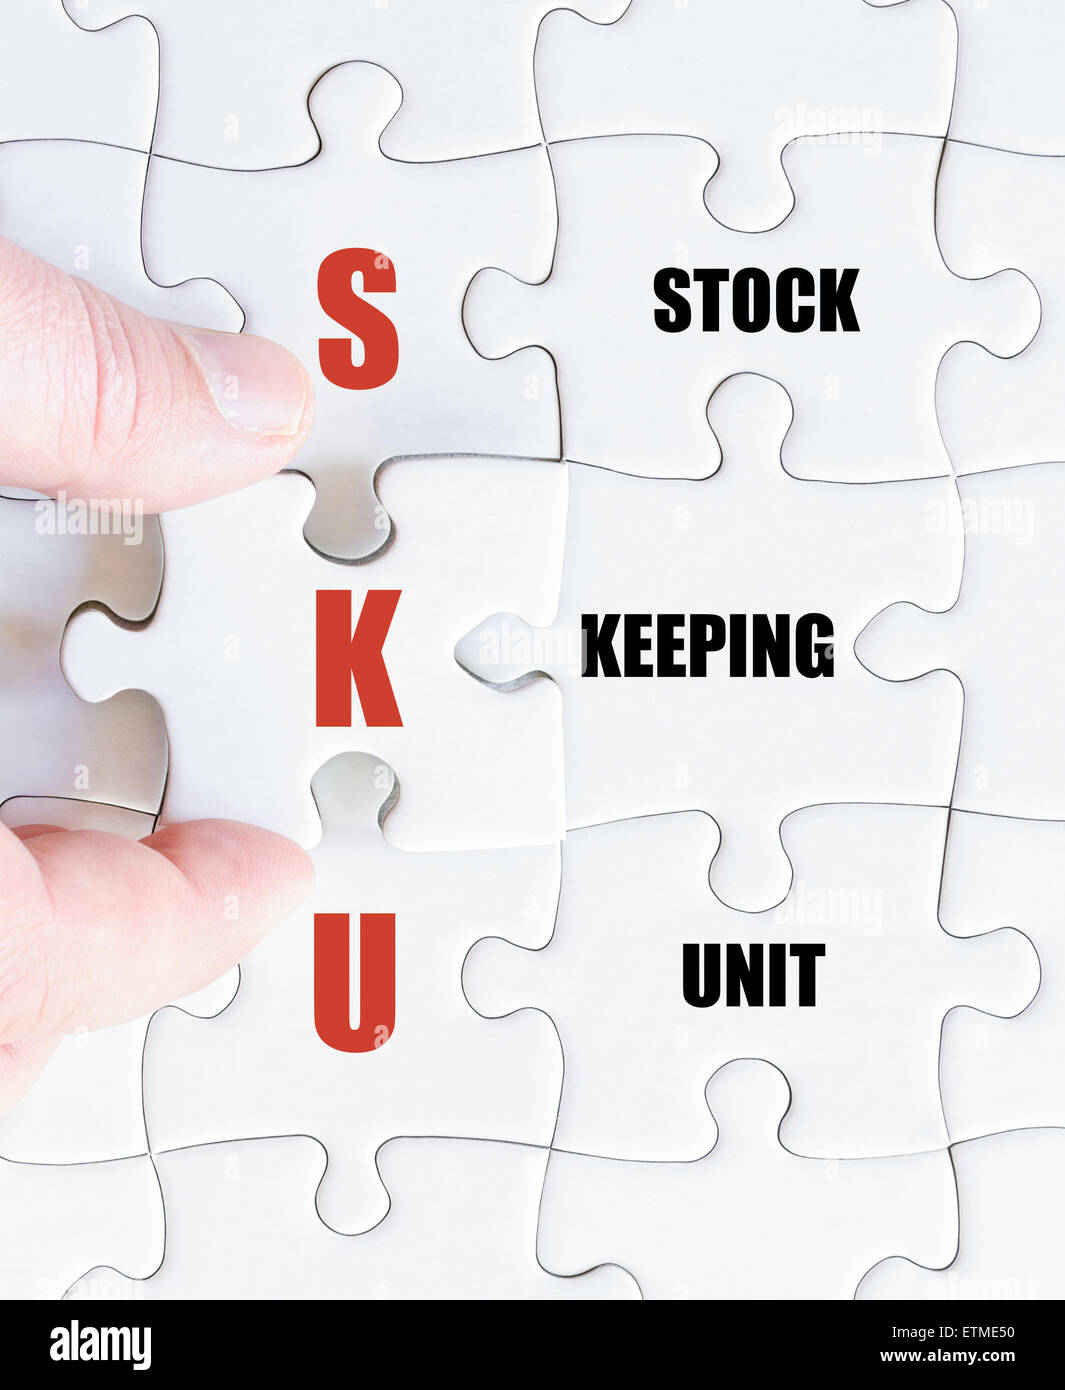 Hand of a business man completing the puzzle with the last missing piece.Concept image of Business Acronym SKU as Stock Keeping Unit Stock Photo